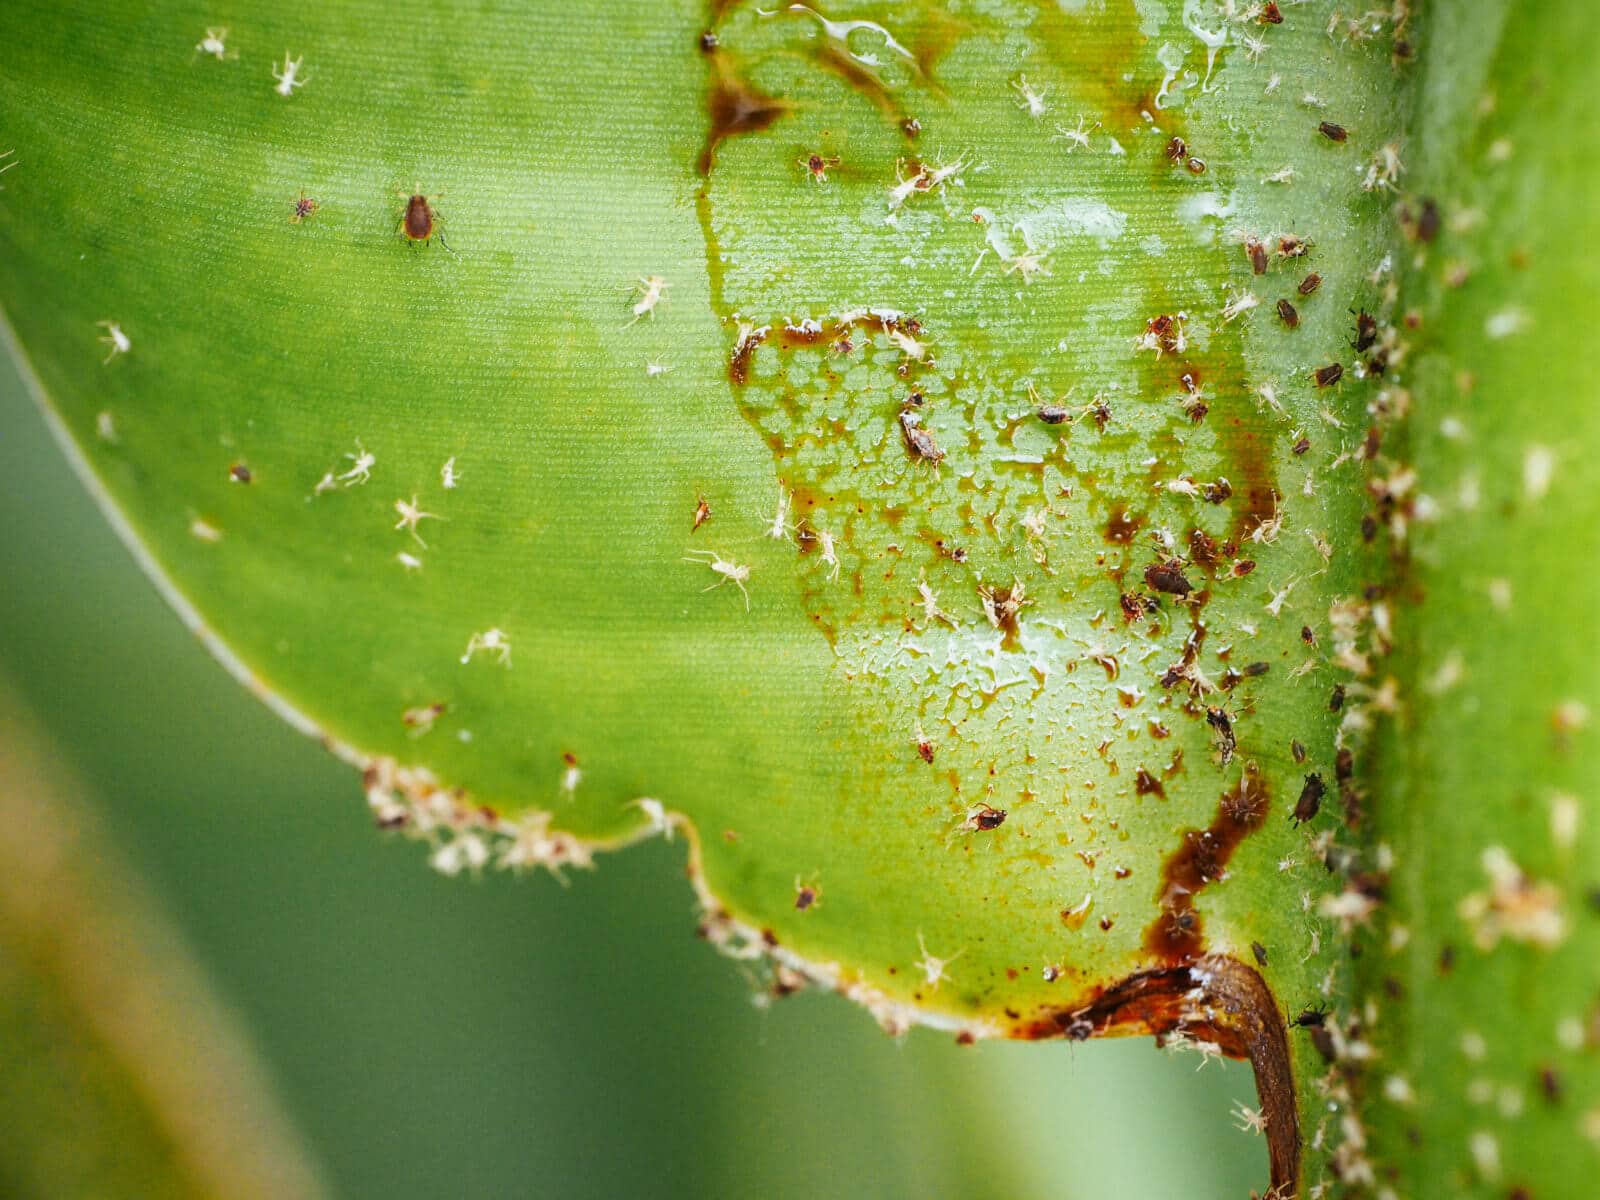 Aphids excrete a sugary liquid waste called honeydew